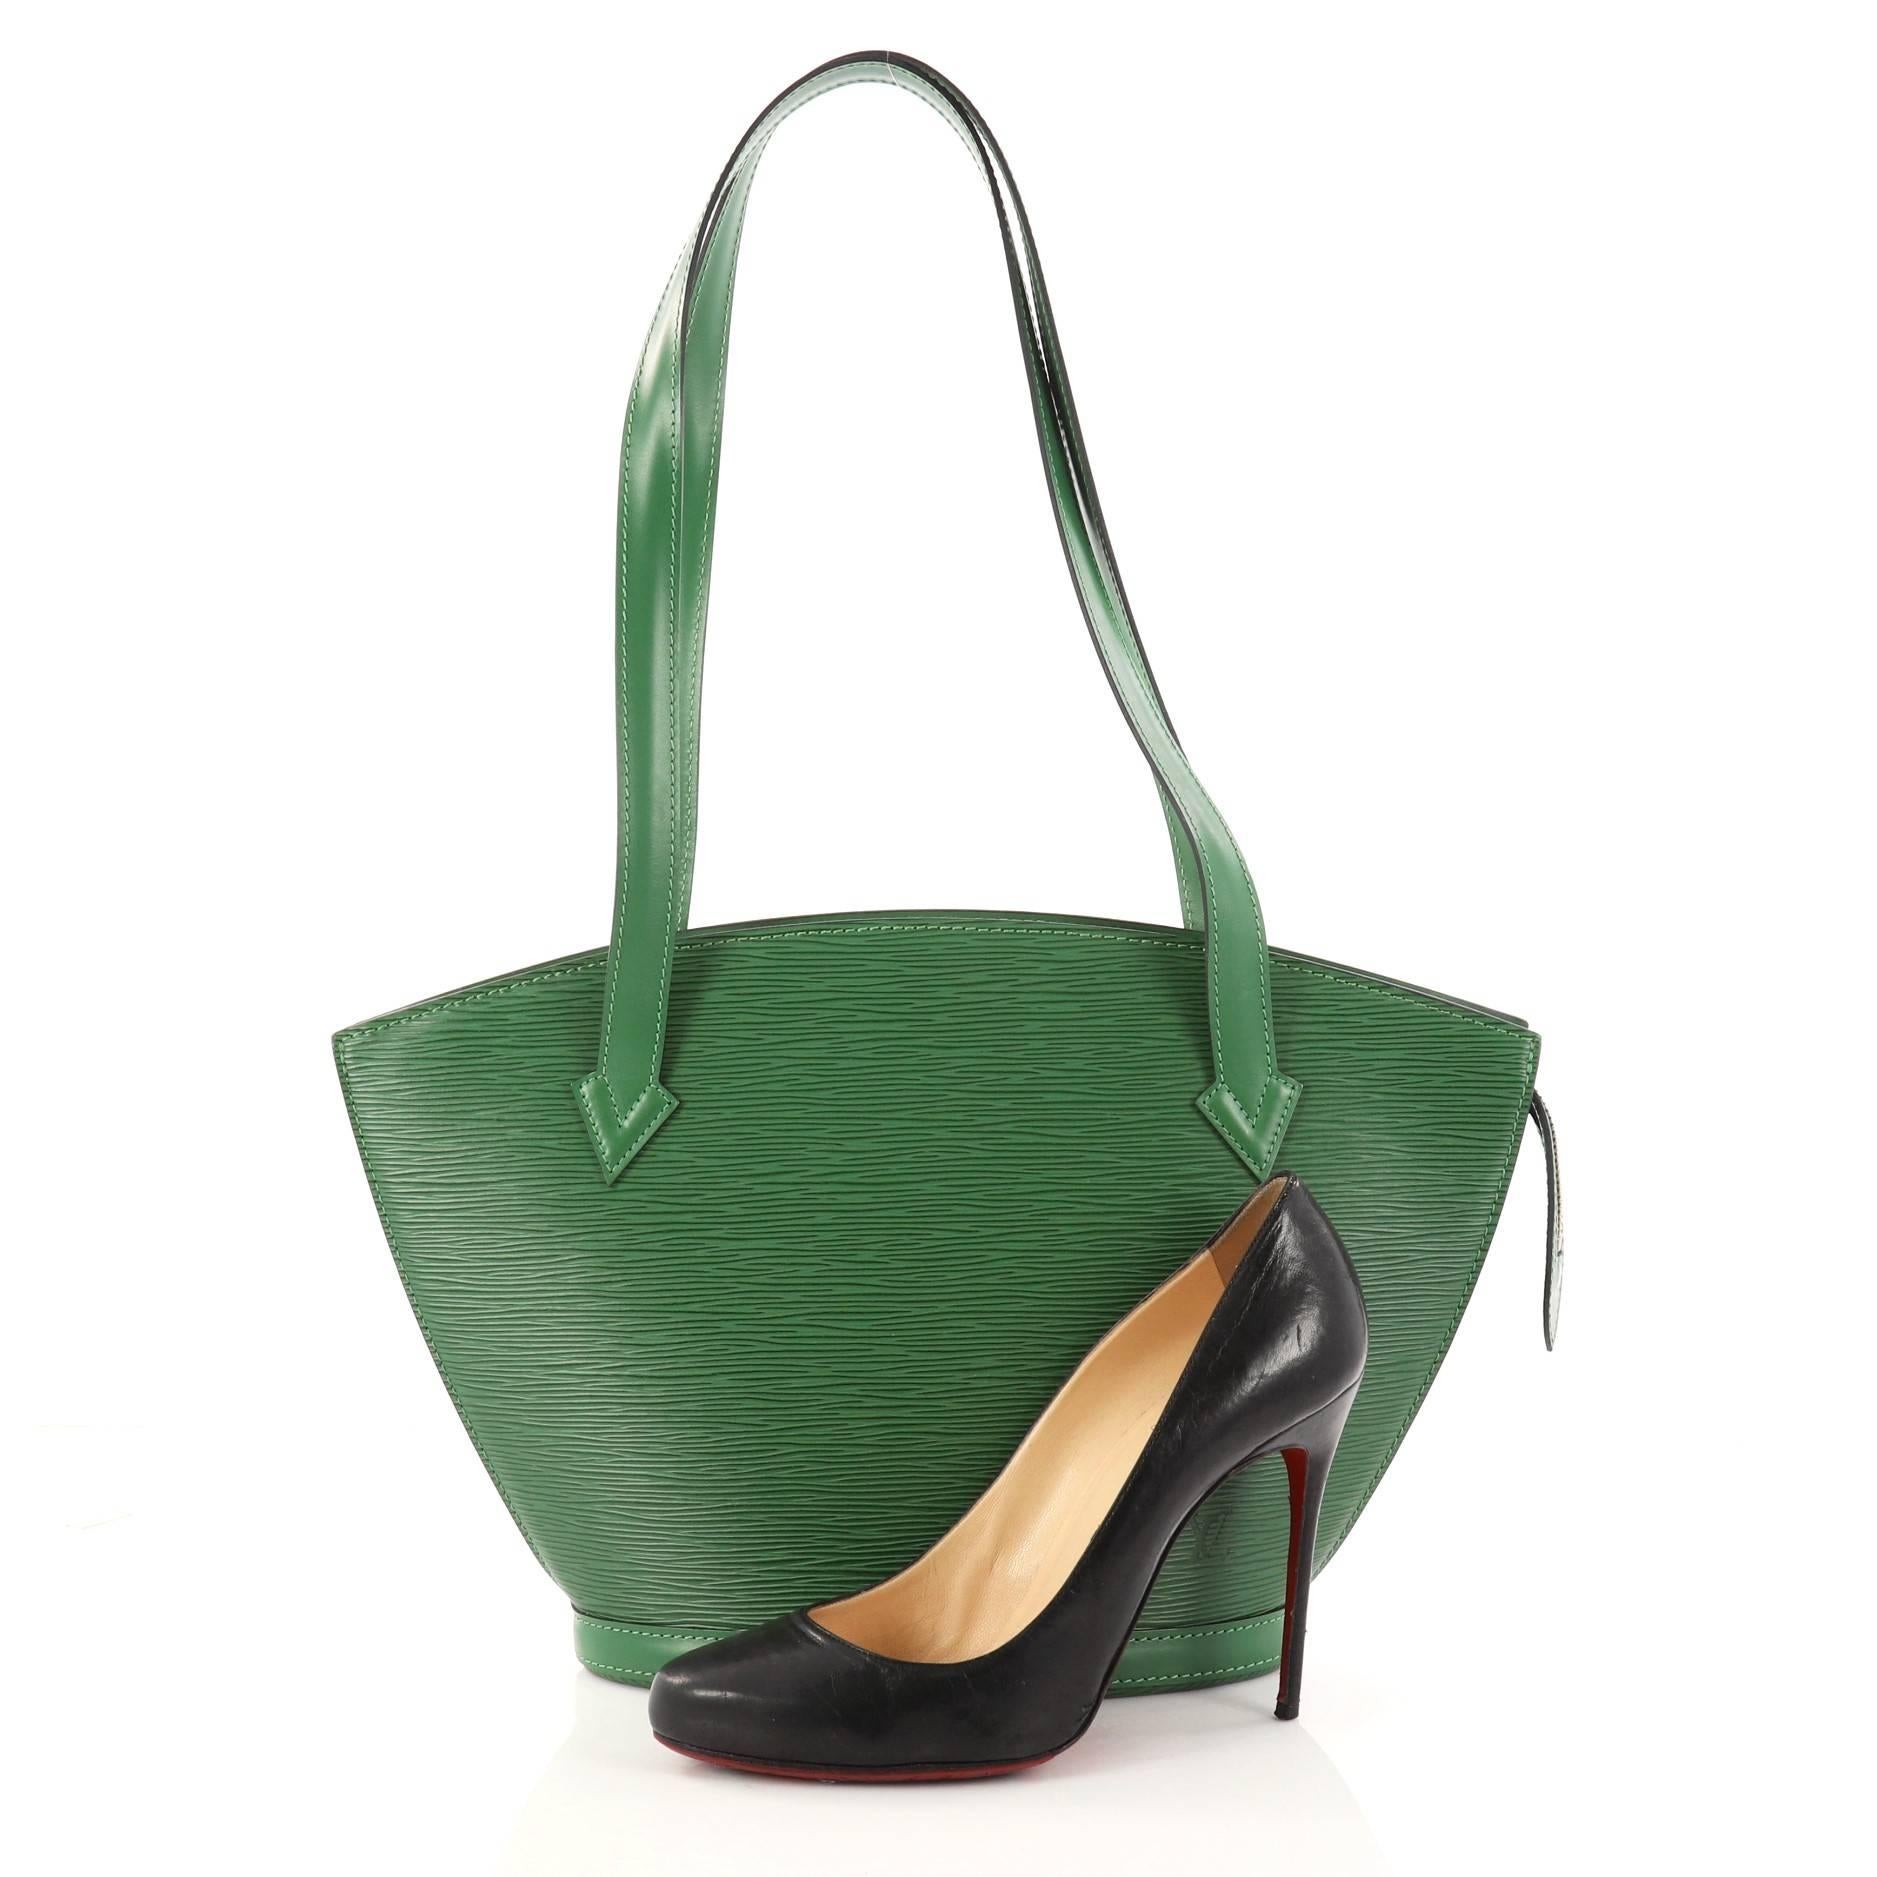 This authentic Louis Vuitton Saint Jacques Handbag Epi Leather PM is refined and elegant. Crafted from Louis Vuitton's signature green epi leather, this fan-shaped bag features long straps, subtle LV logo at the front and gold-tone zip closure. Its